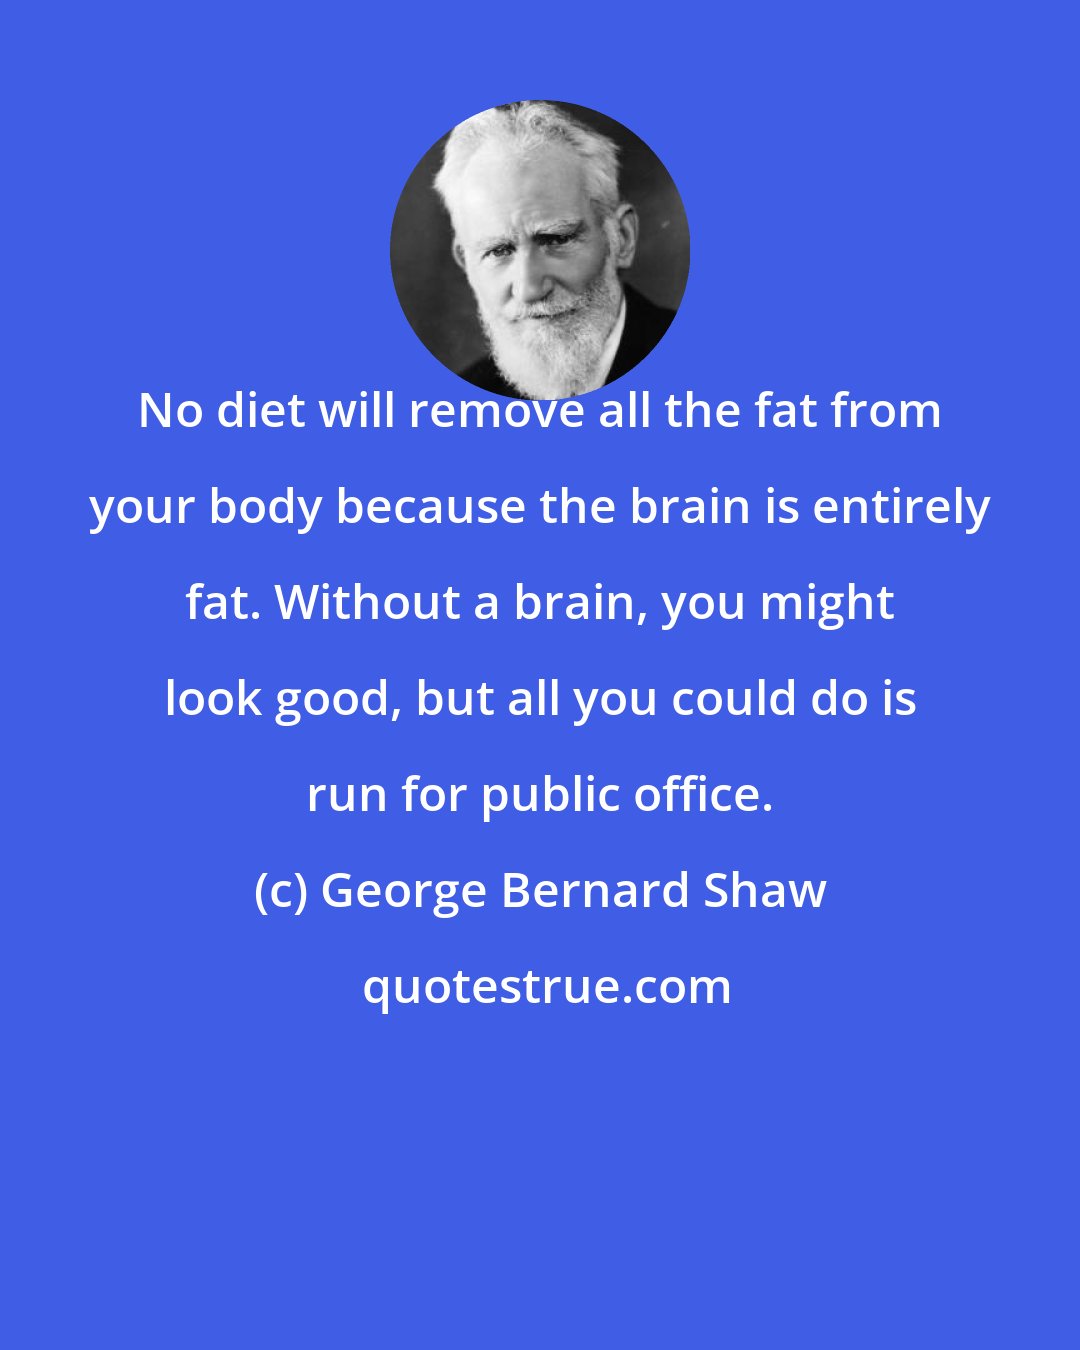 George Bernard Shaw: No diet will remove all the fat from your body because the brain is entirely fat. Without a brain, you might look good, but all you could do is run for public office.